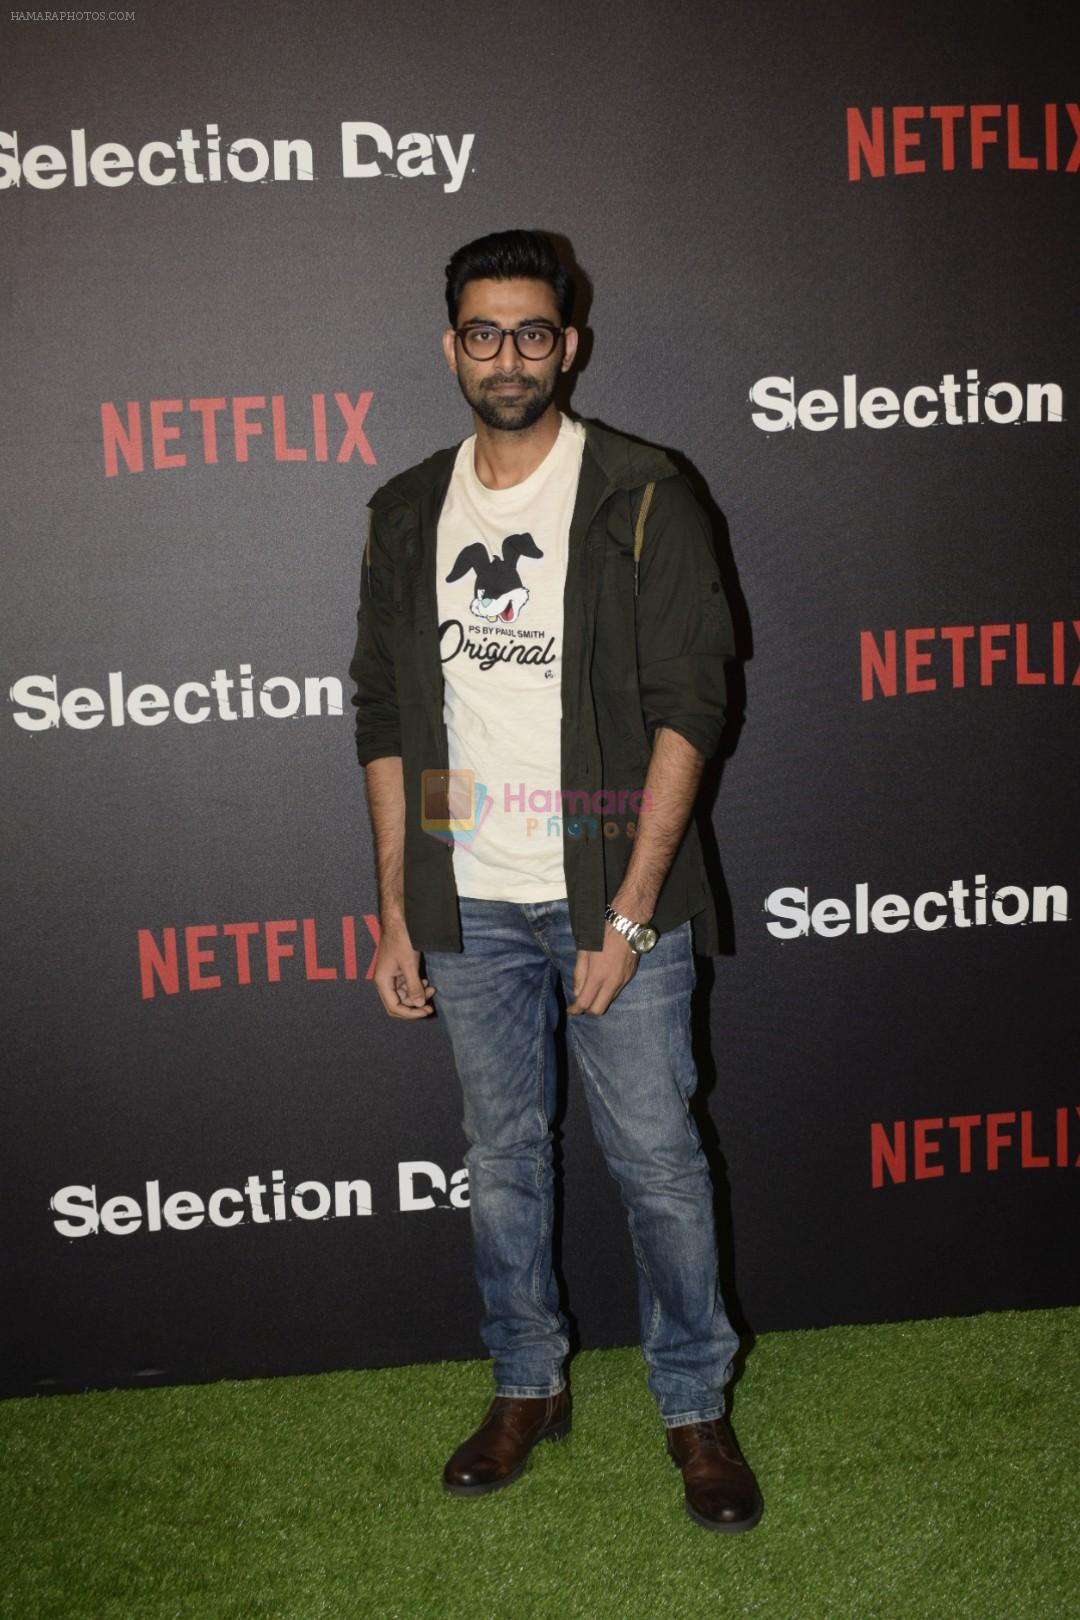 at the Red Carpet of Netfix Upcoming Series Selection Day on 18th Dec 2018